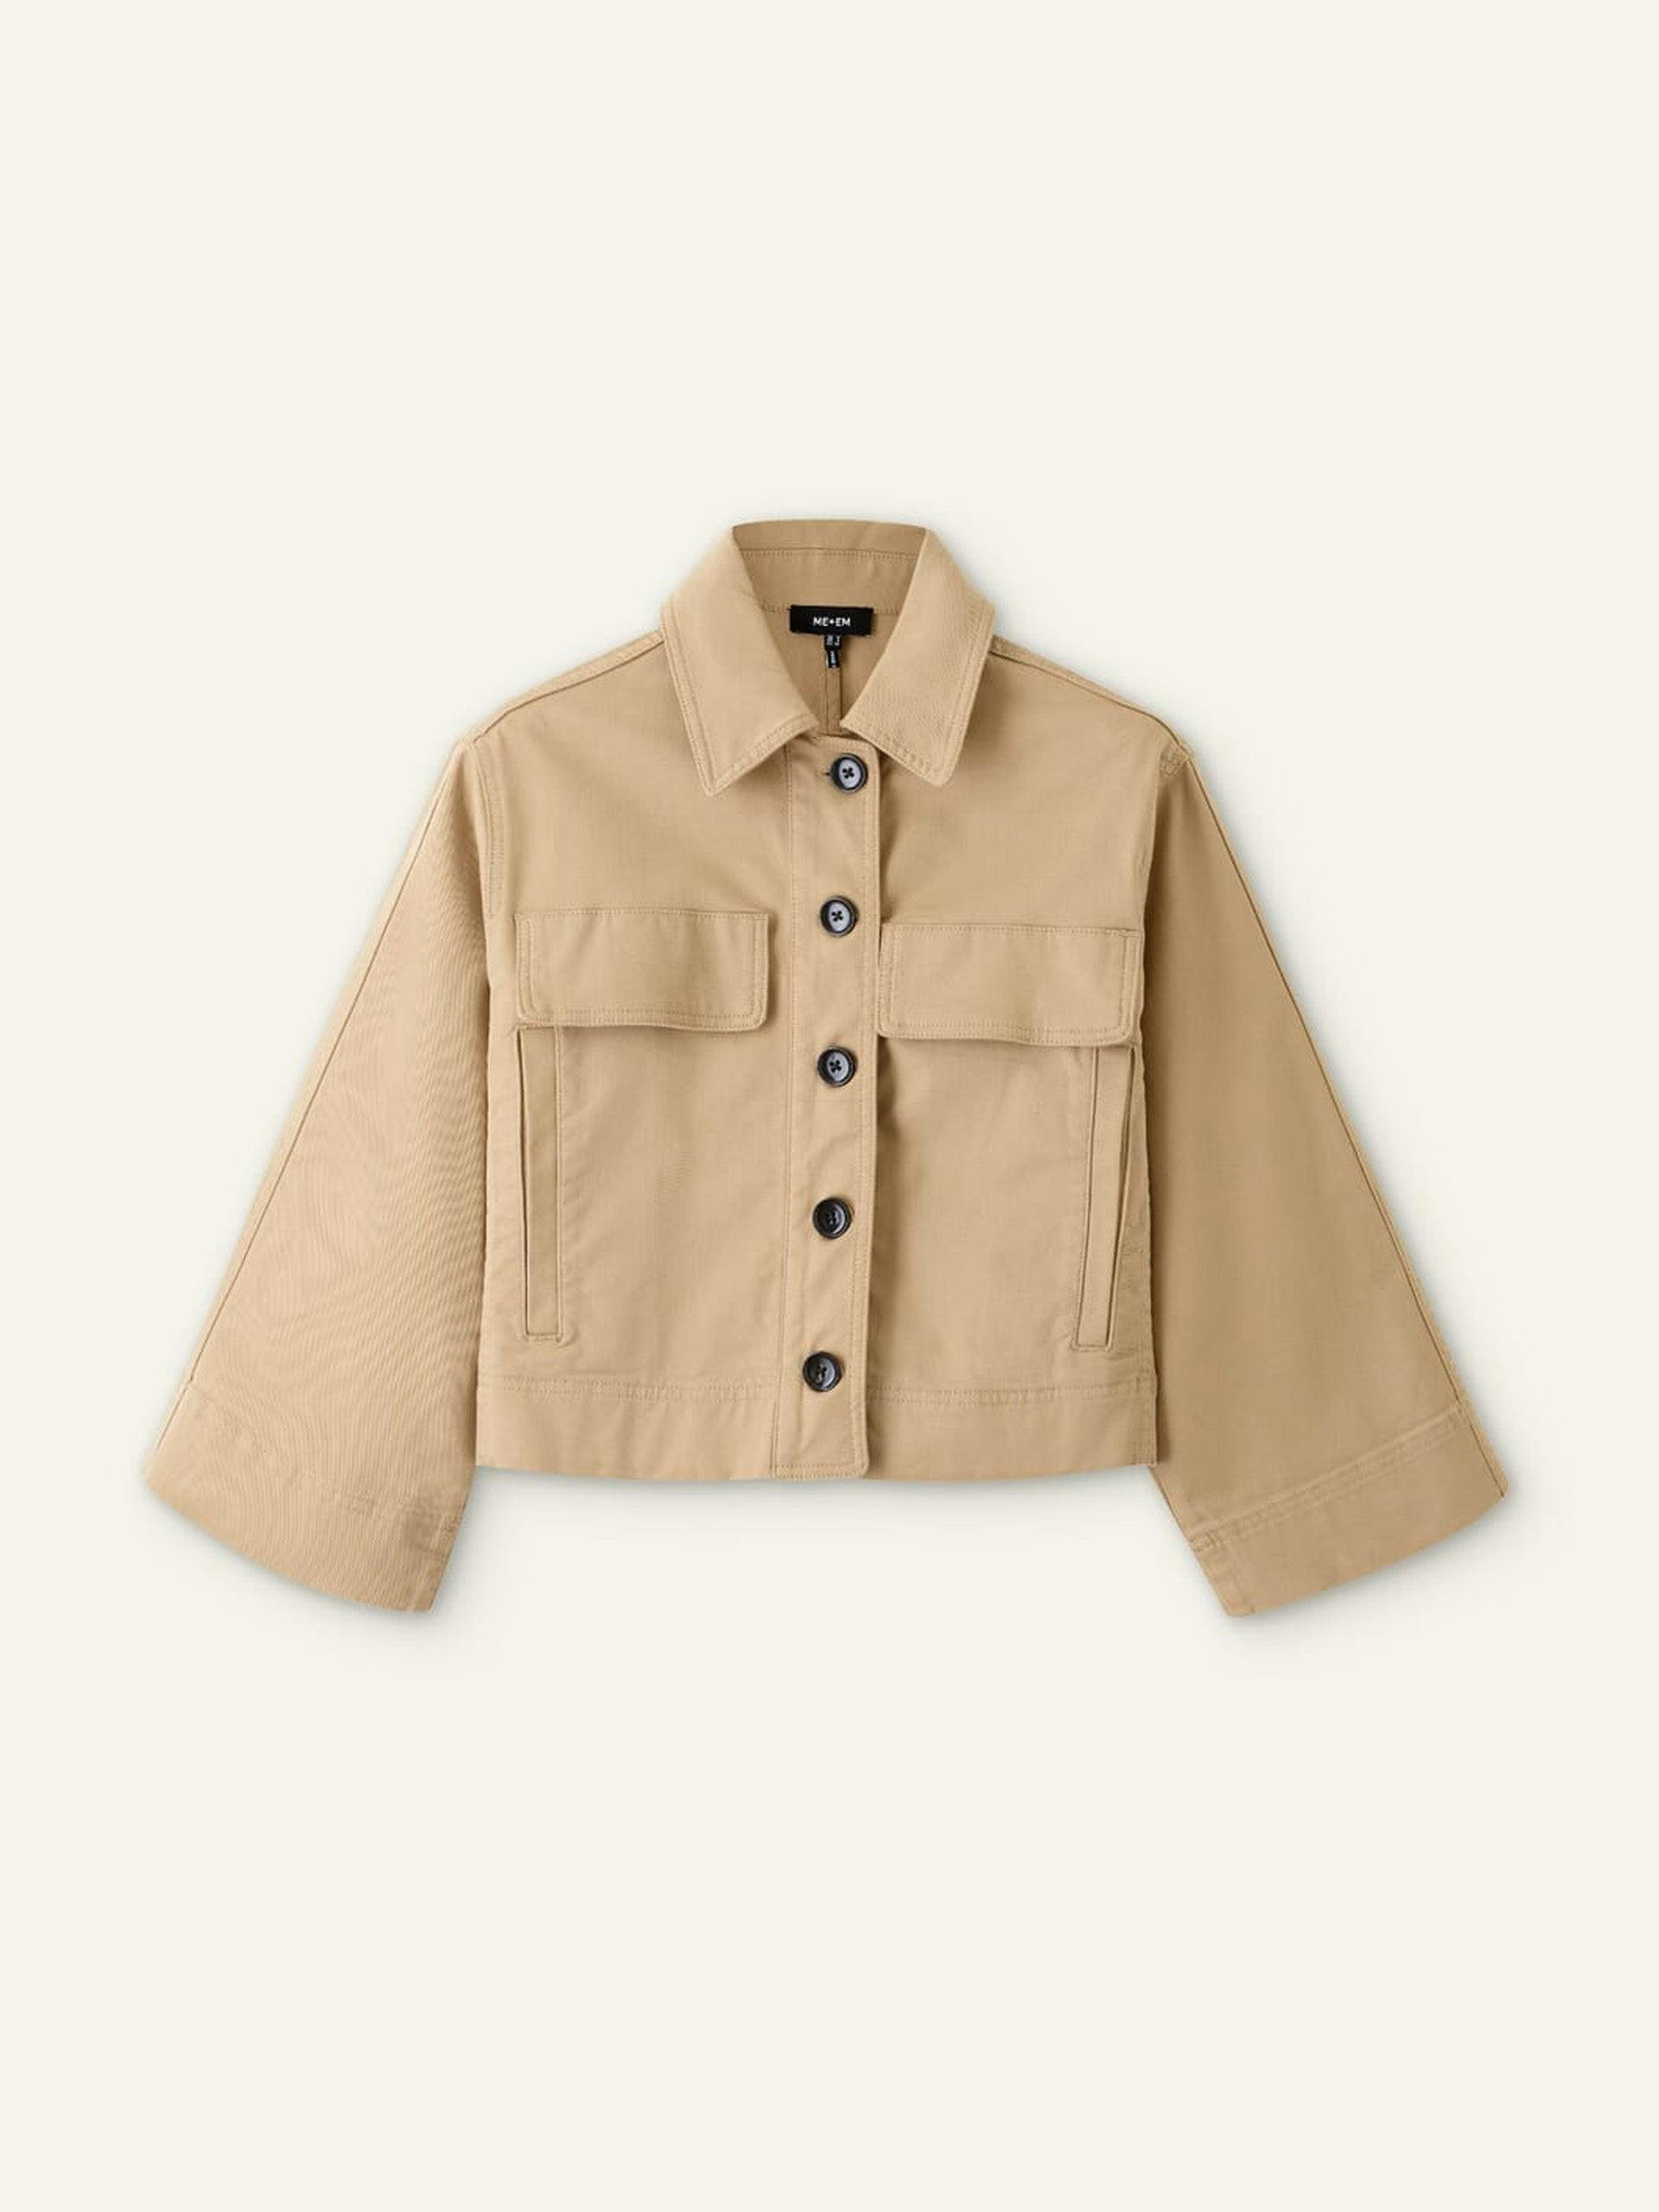 Cotton twill casual swing jacket